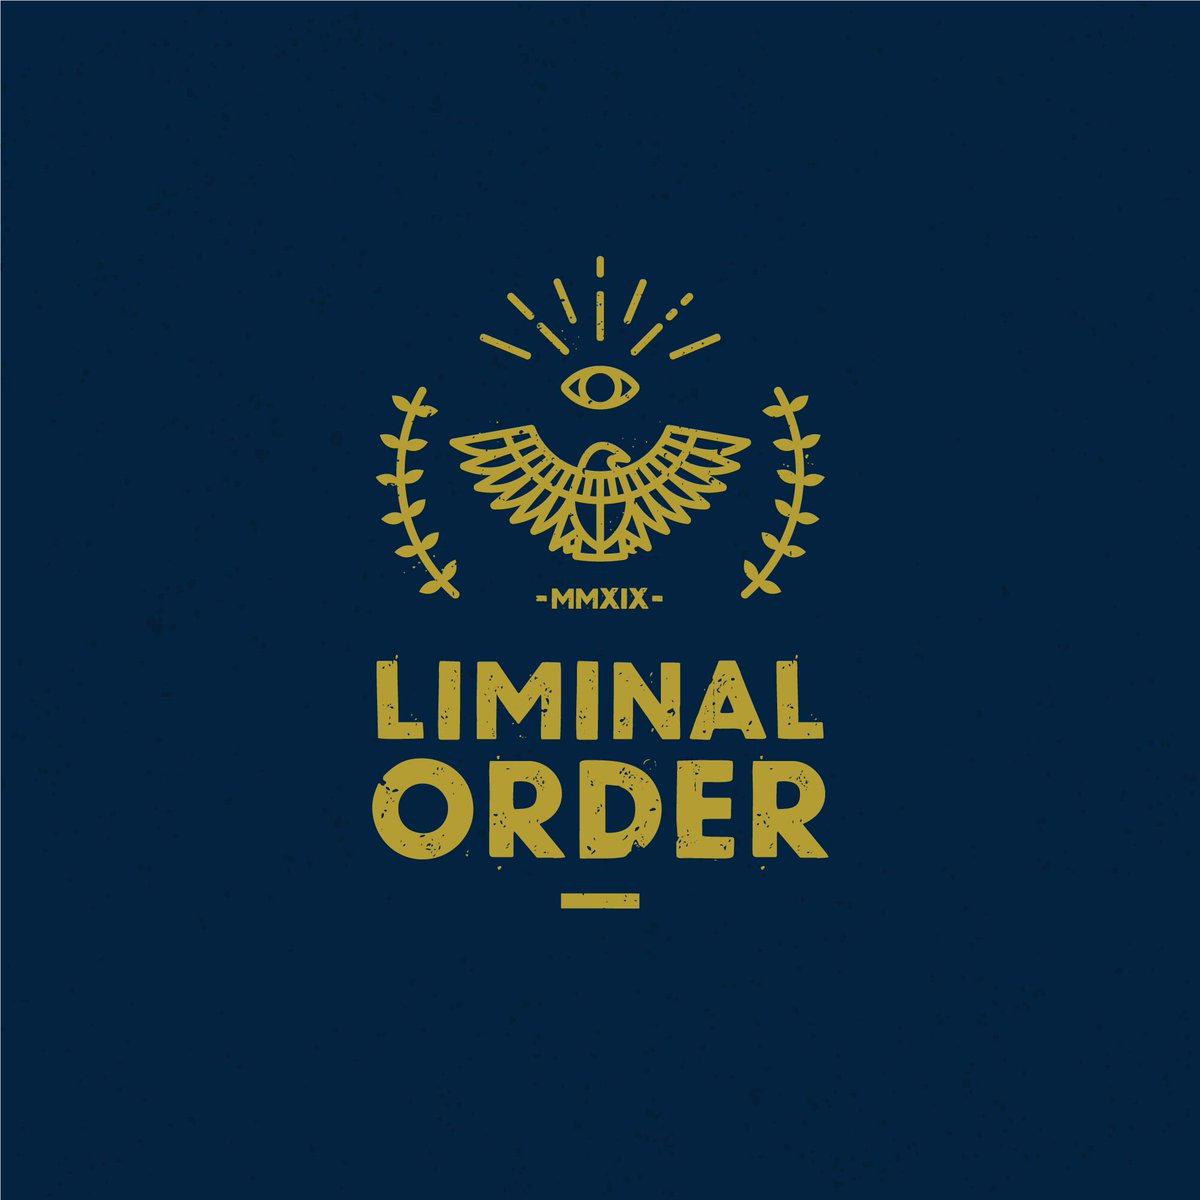 And then, my biggest accomplishment yet, I started the Liminal Order, a private membership community.Our goal is combat all the same forces which led me to this point.But we do it by improving ourselves and helping others.No negativity. http://Liminal-Order.com 